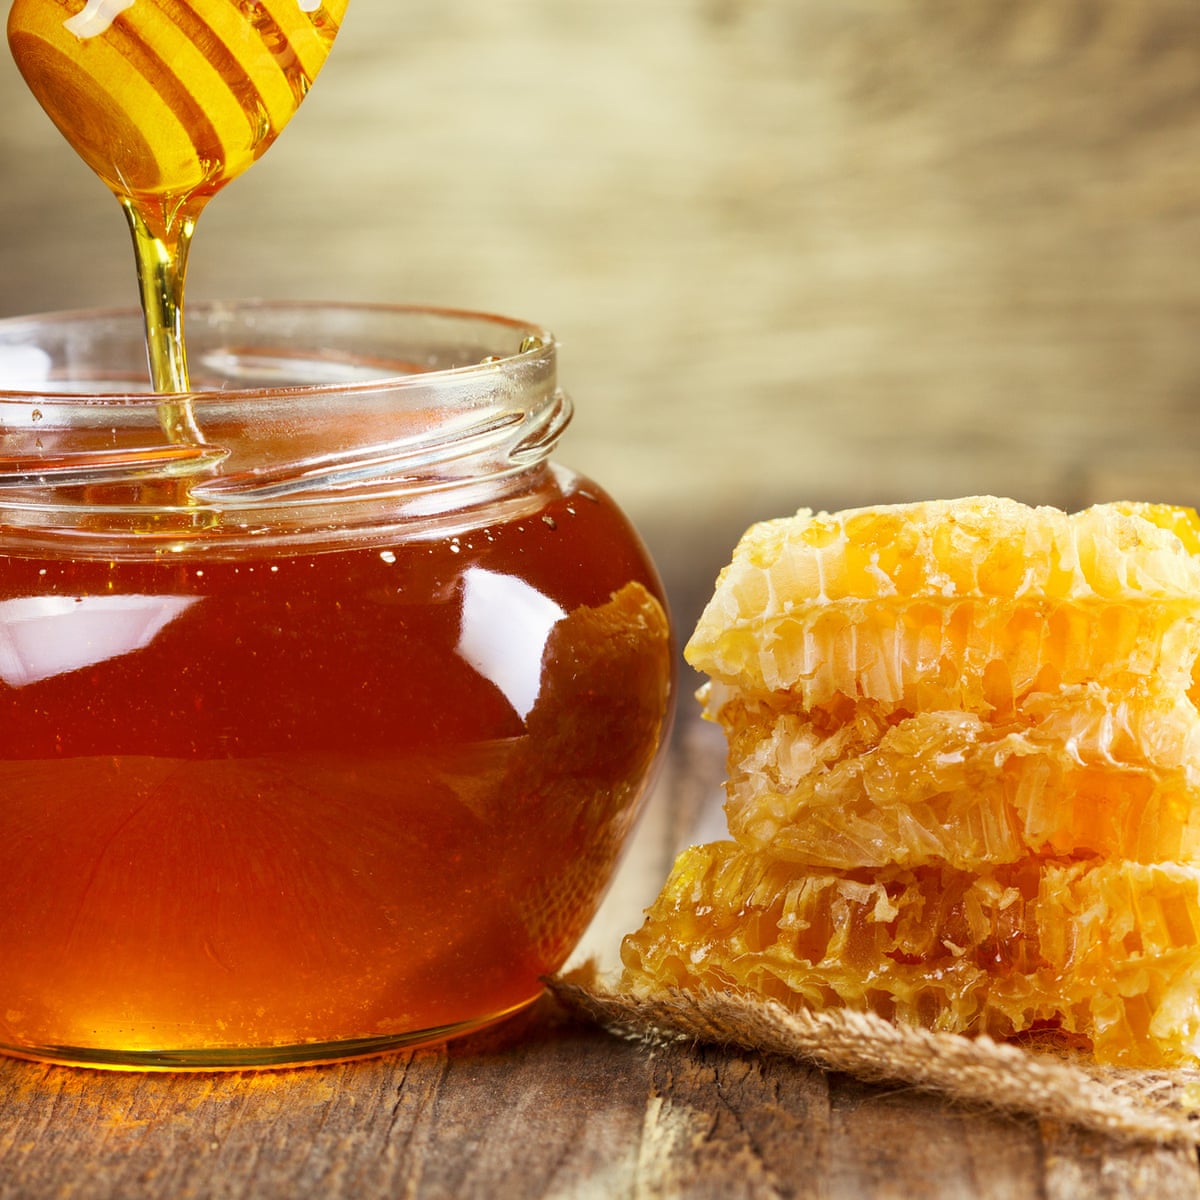 Honey can treat colds and flu-like illnesses 